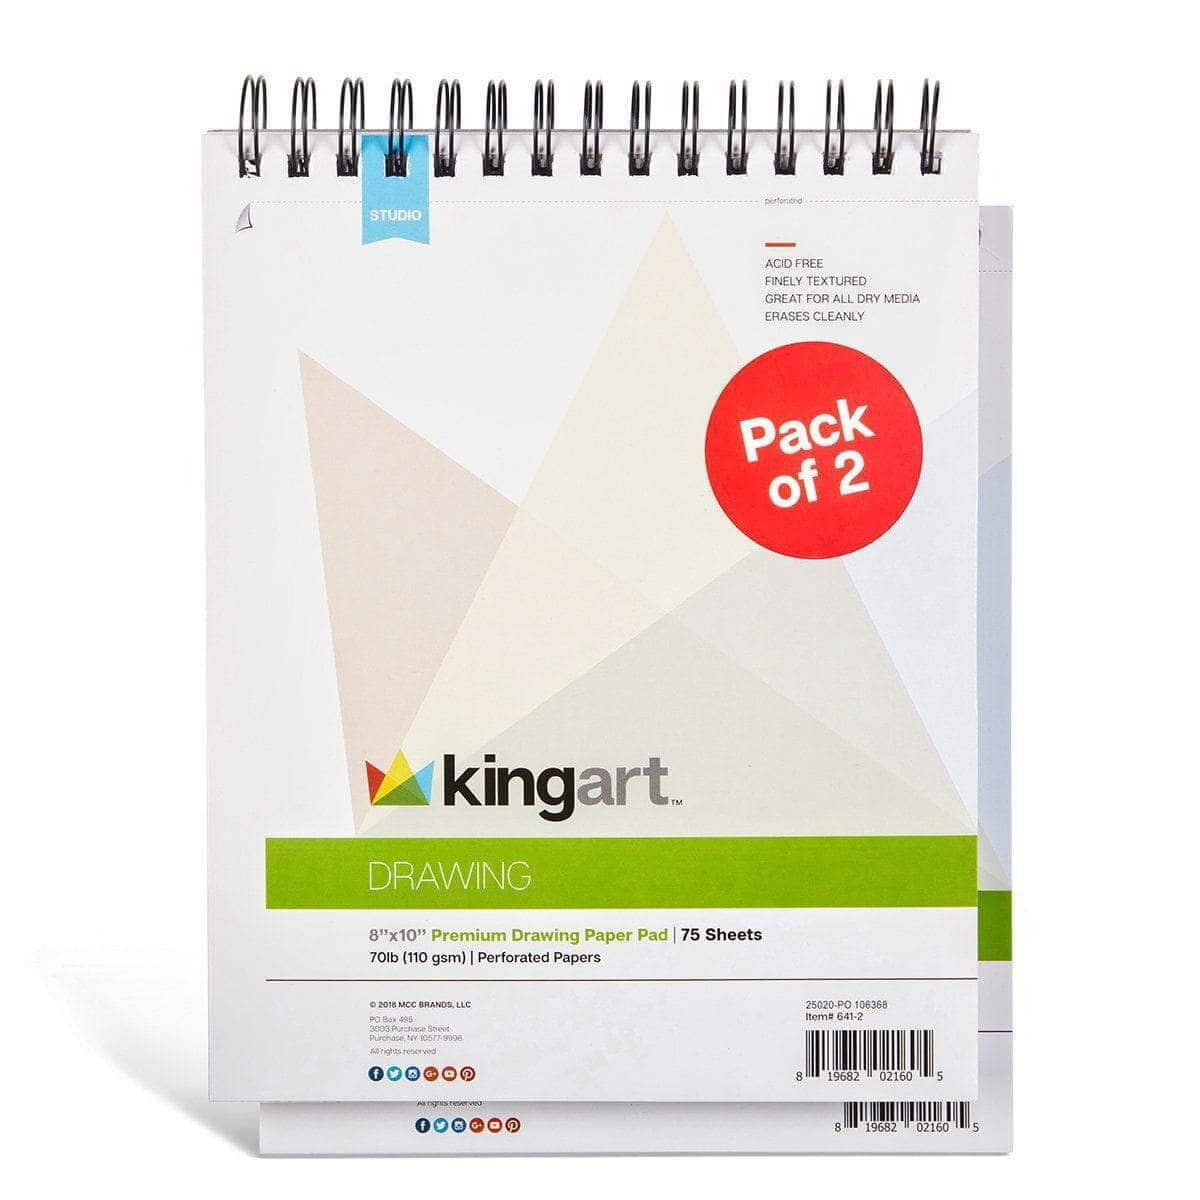 KINGART Drawing Paper Pad, Pack of 2, 8 x 10 inches, 75 Pages Each,  70lb/110gsm, Micro-Perforated, Spiral Bound 